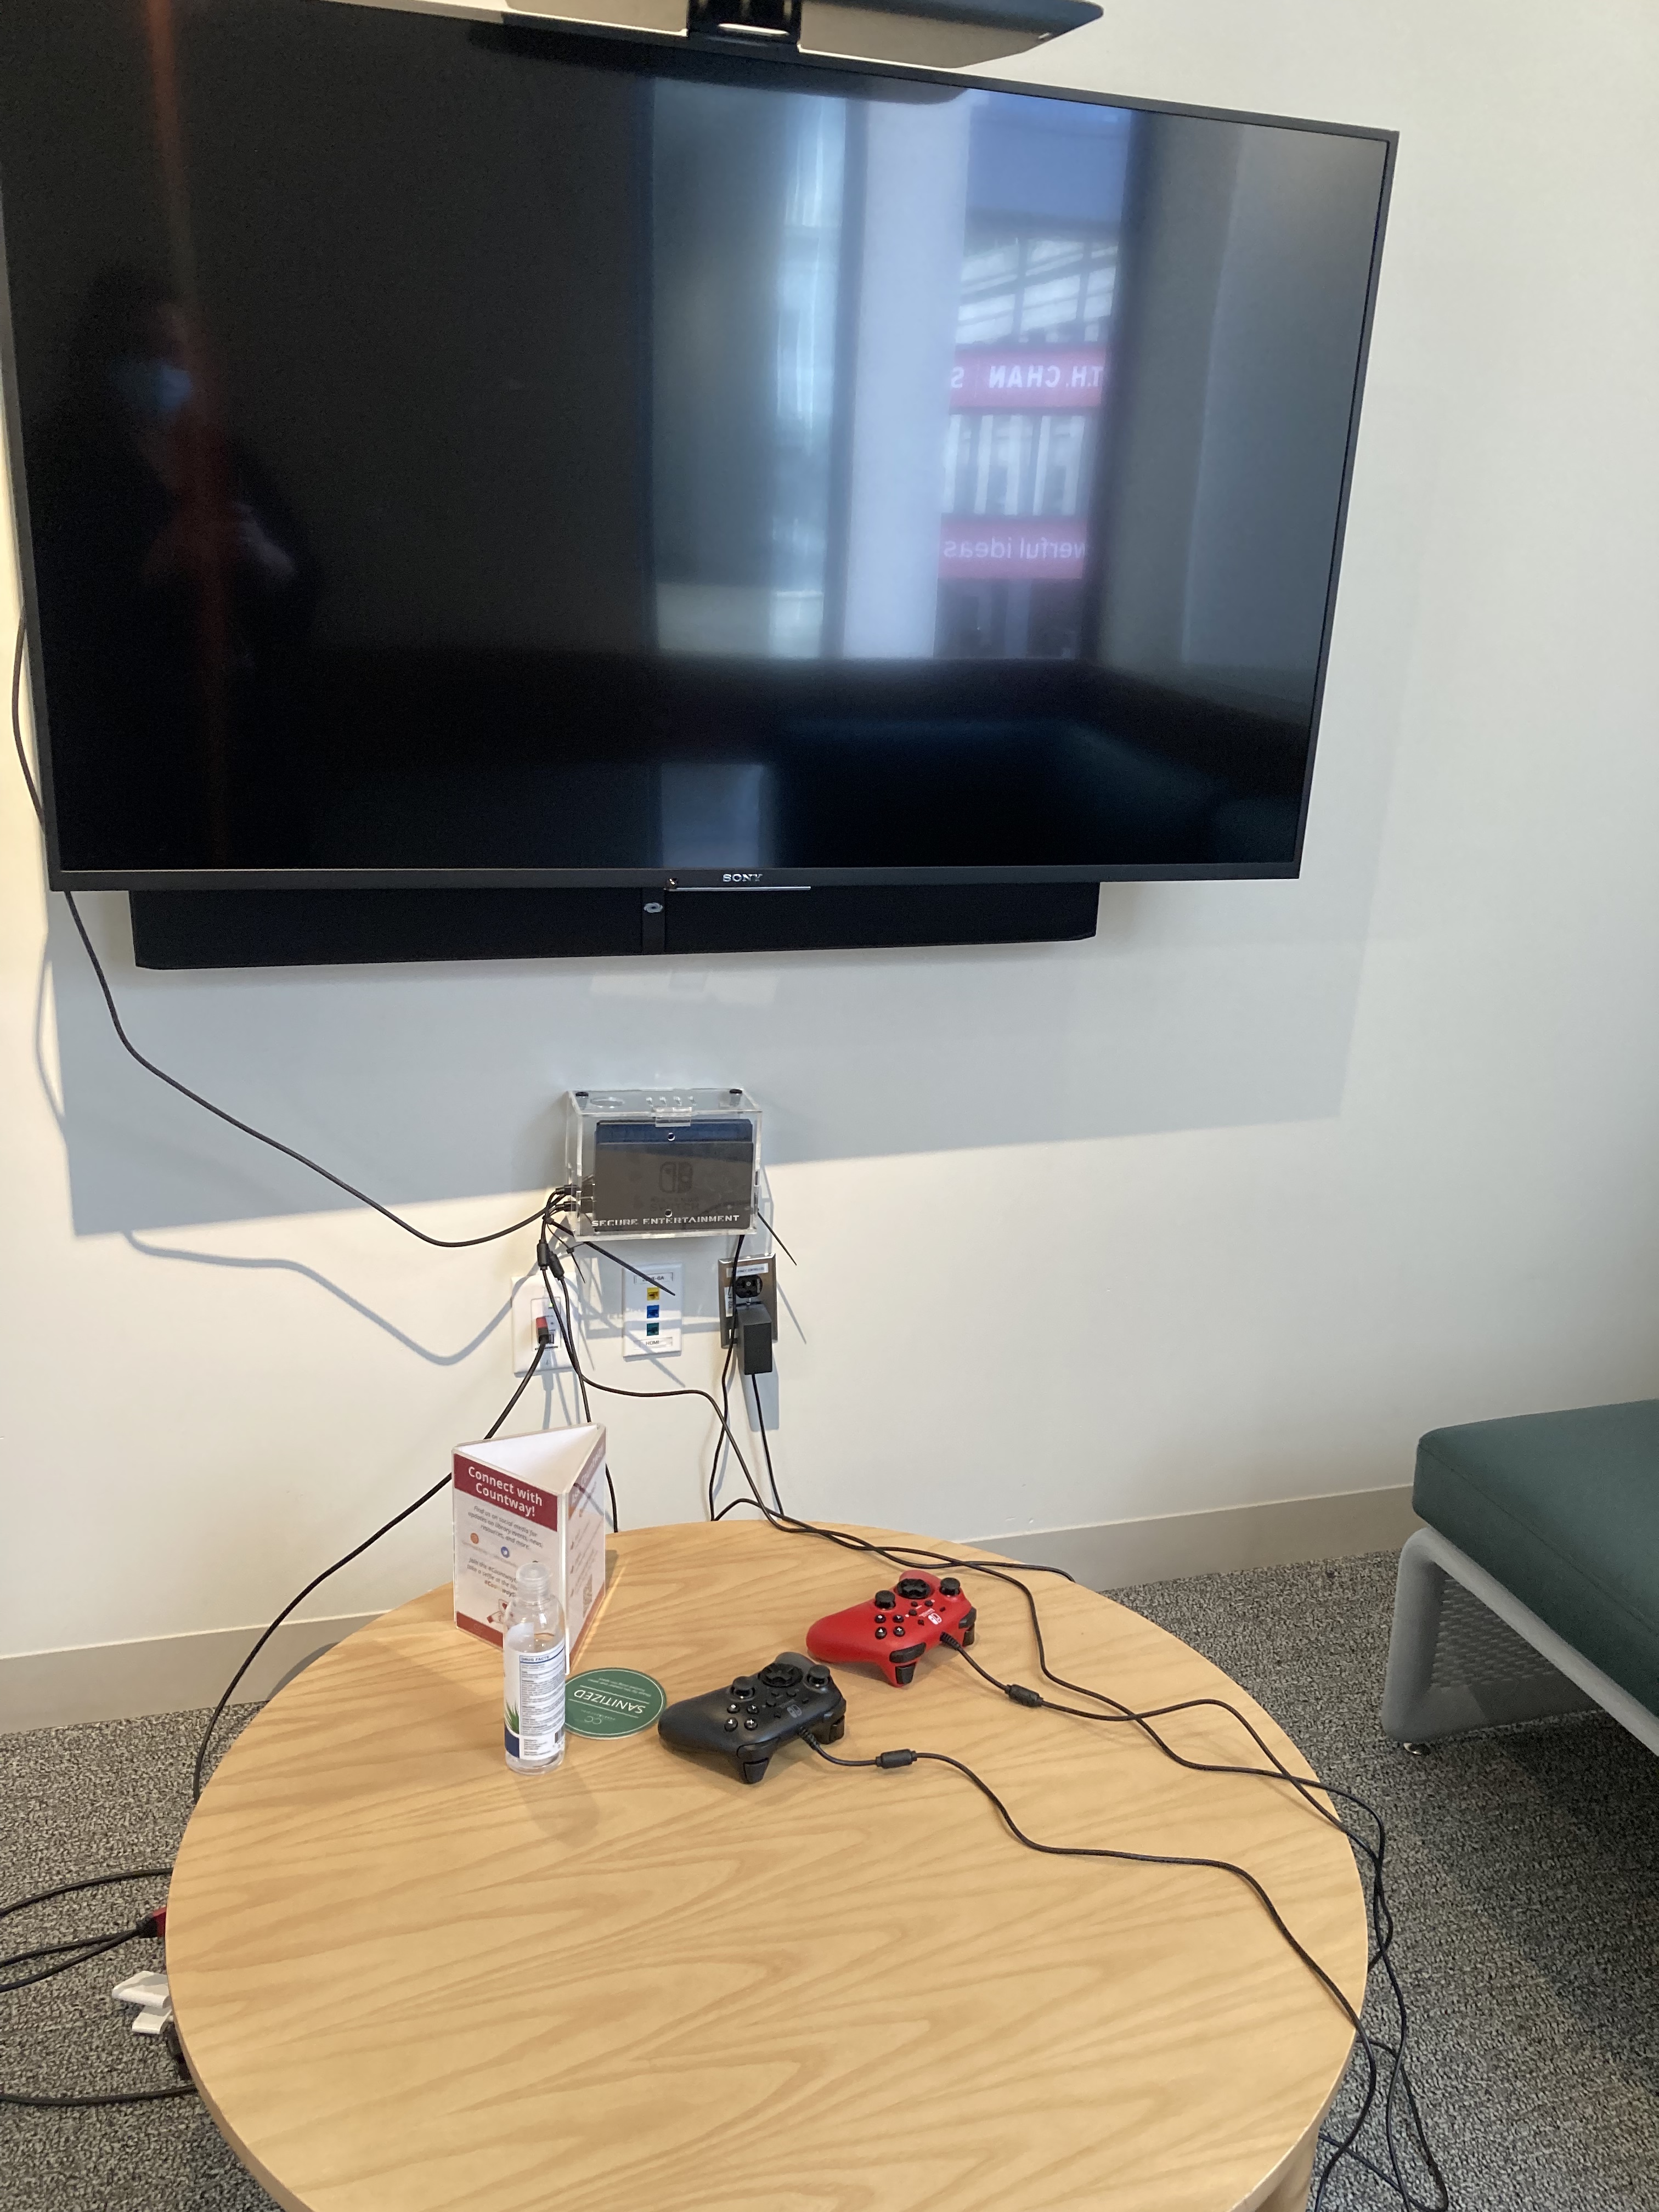 Wall-mounted flat screen television behind a table with two Nintendo Switch controllers